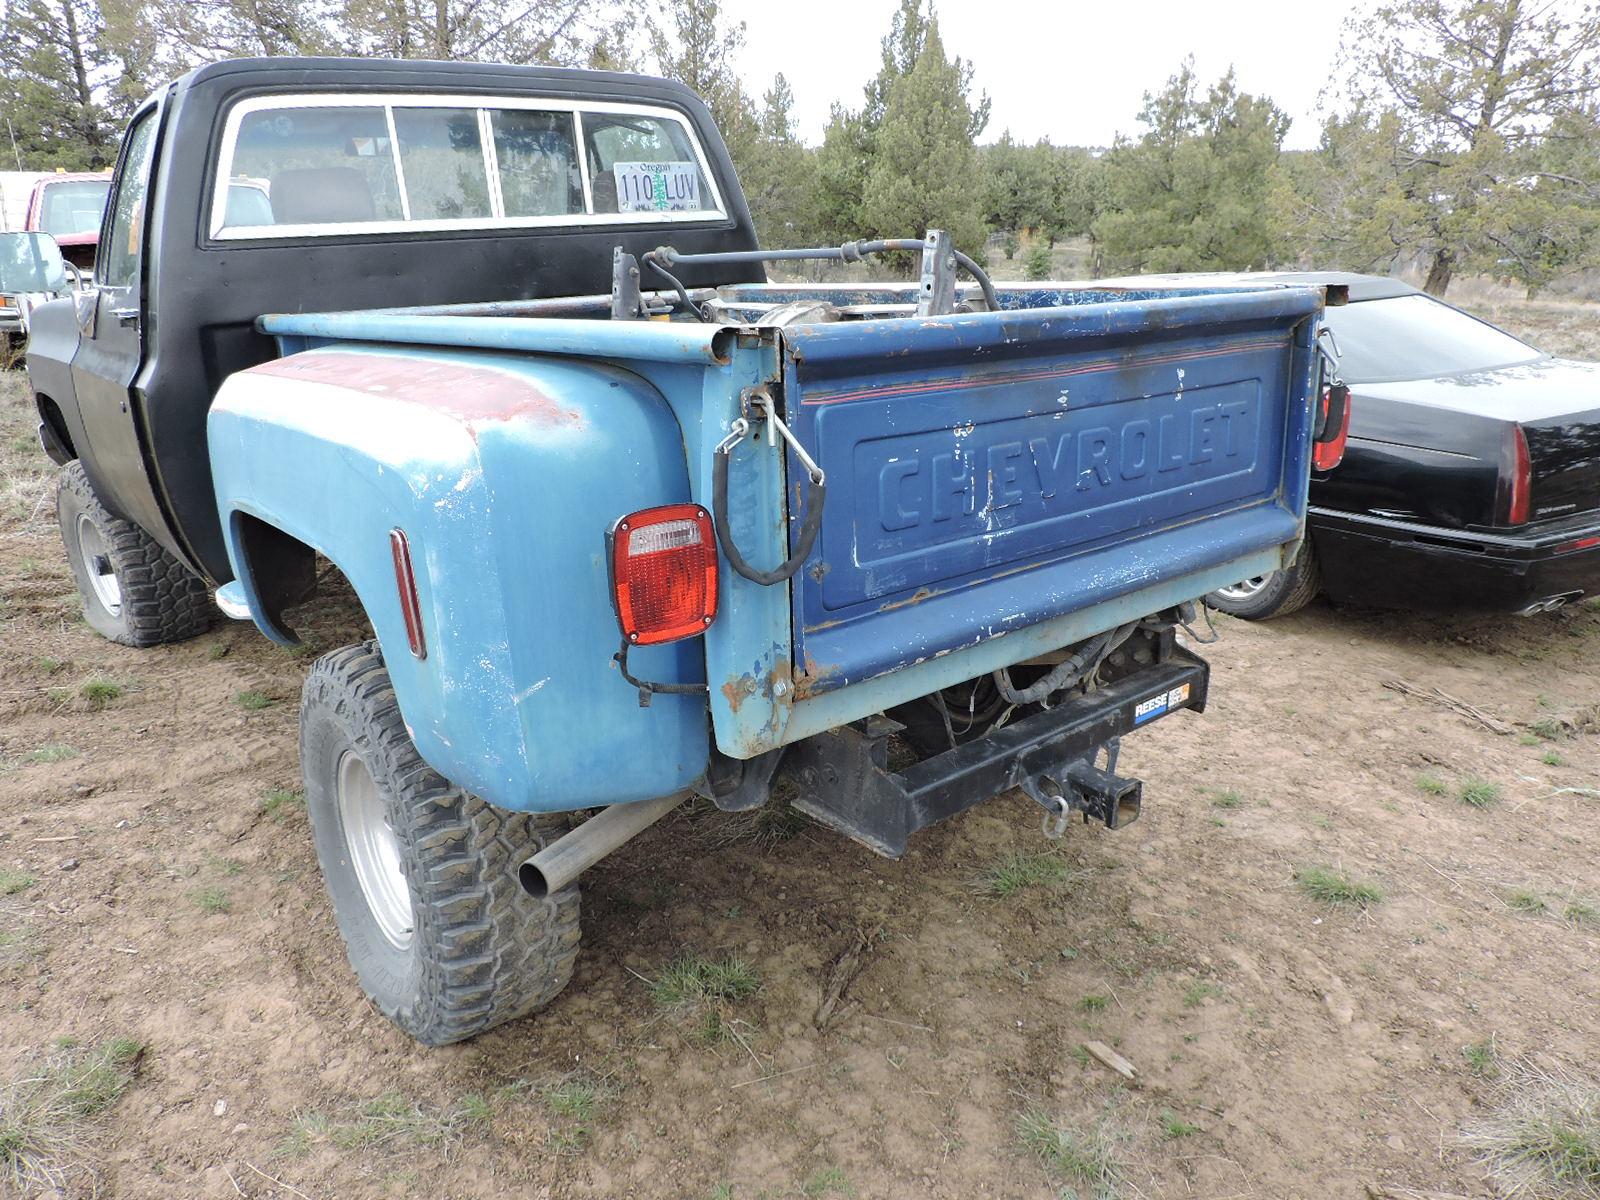 1976 Chevrolet Regular Cab Step-Side Pickup / 4X4 with 350 and 5-Speed